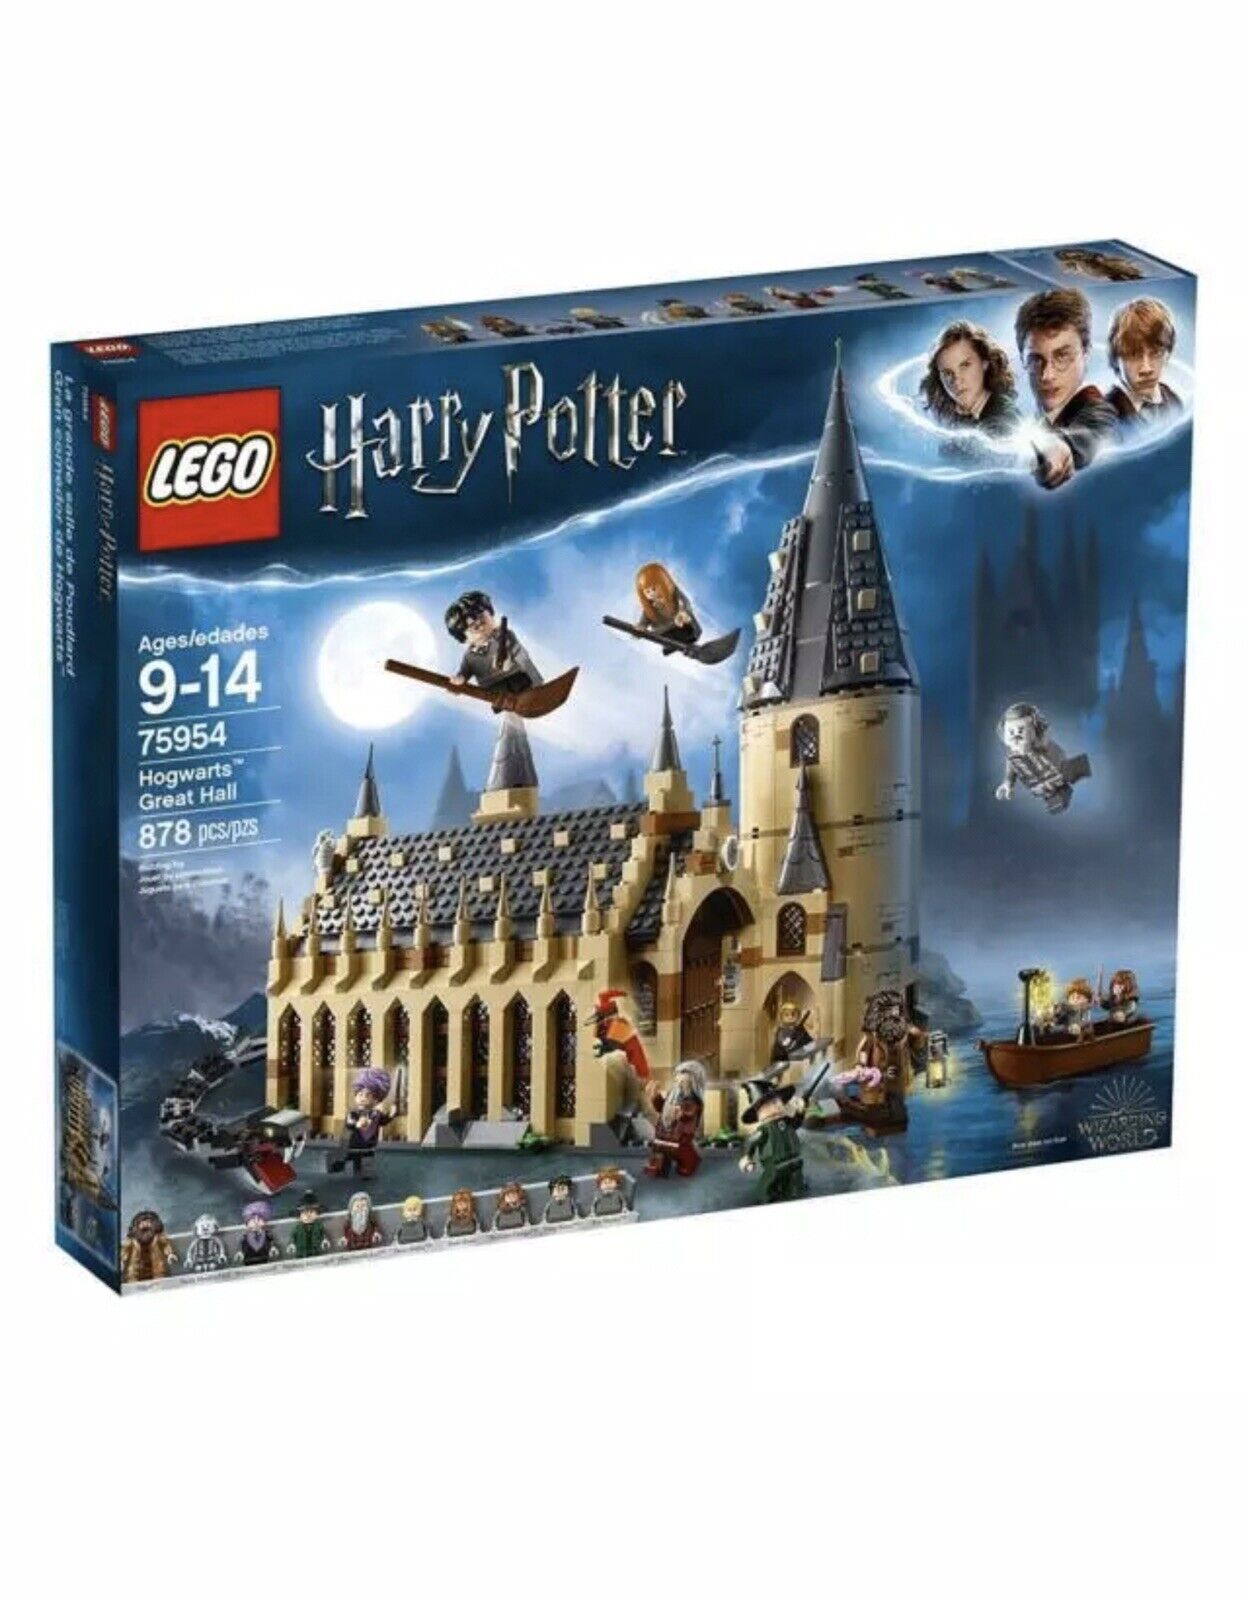 LEGO Harry Potter 75954 Hogwarts Great Hall New Factory Sealed Retired